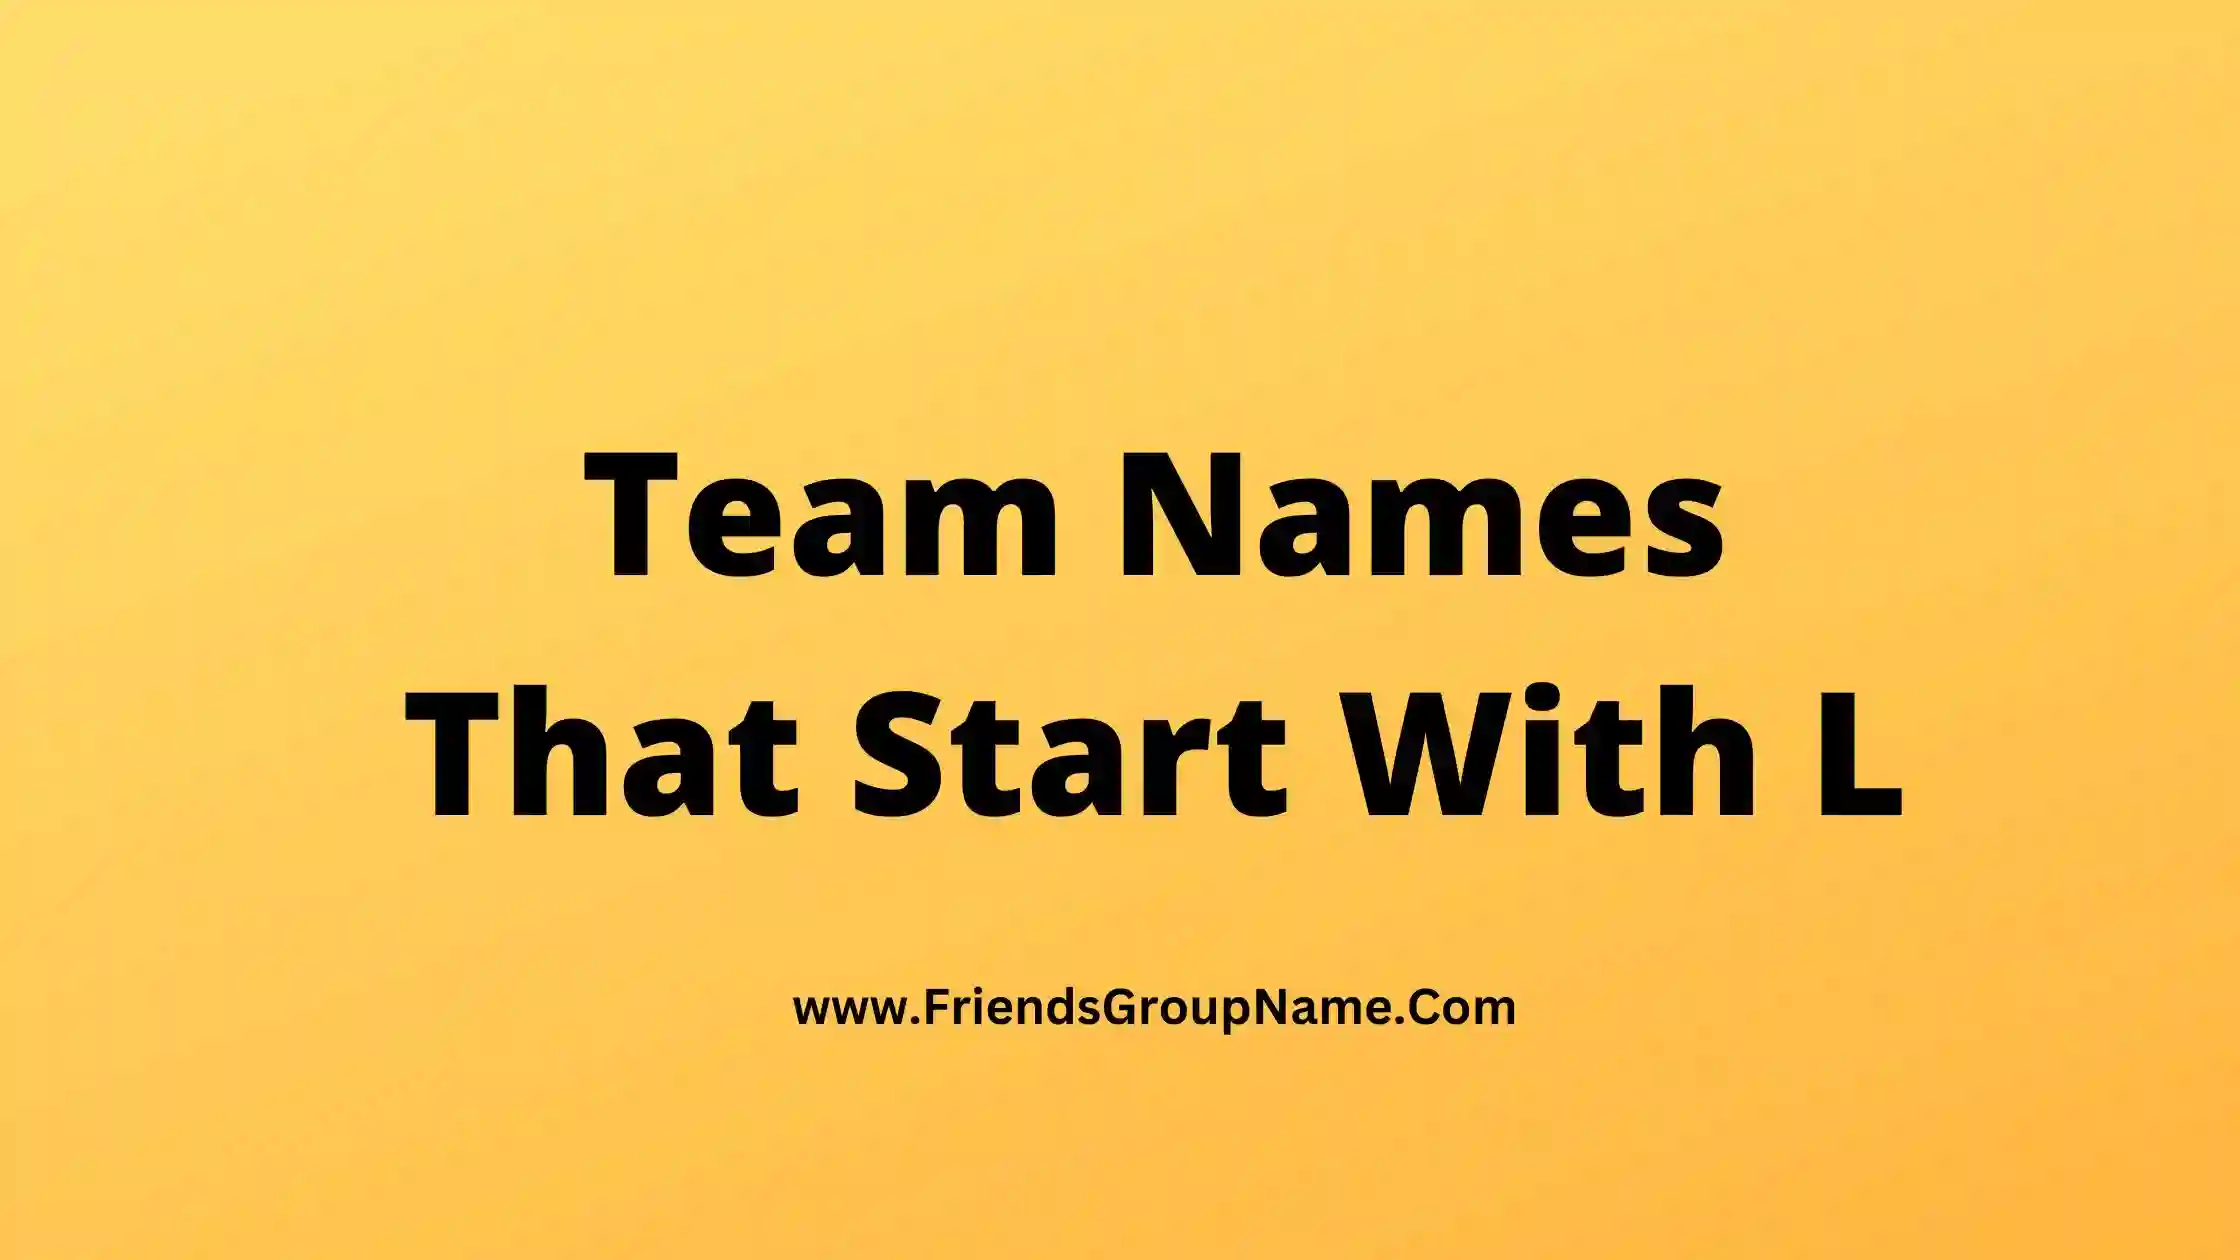 Team Names That Start With L